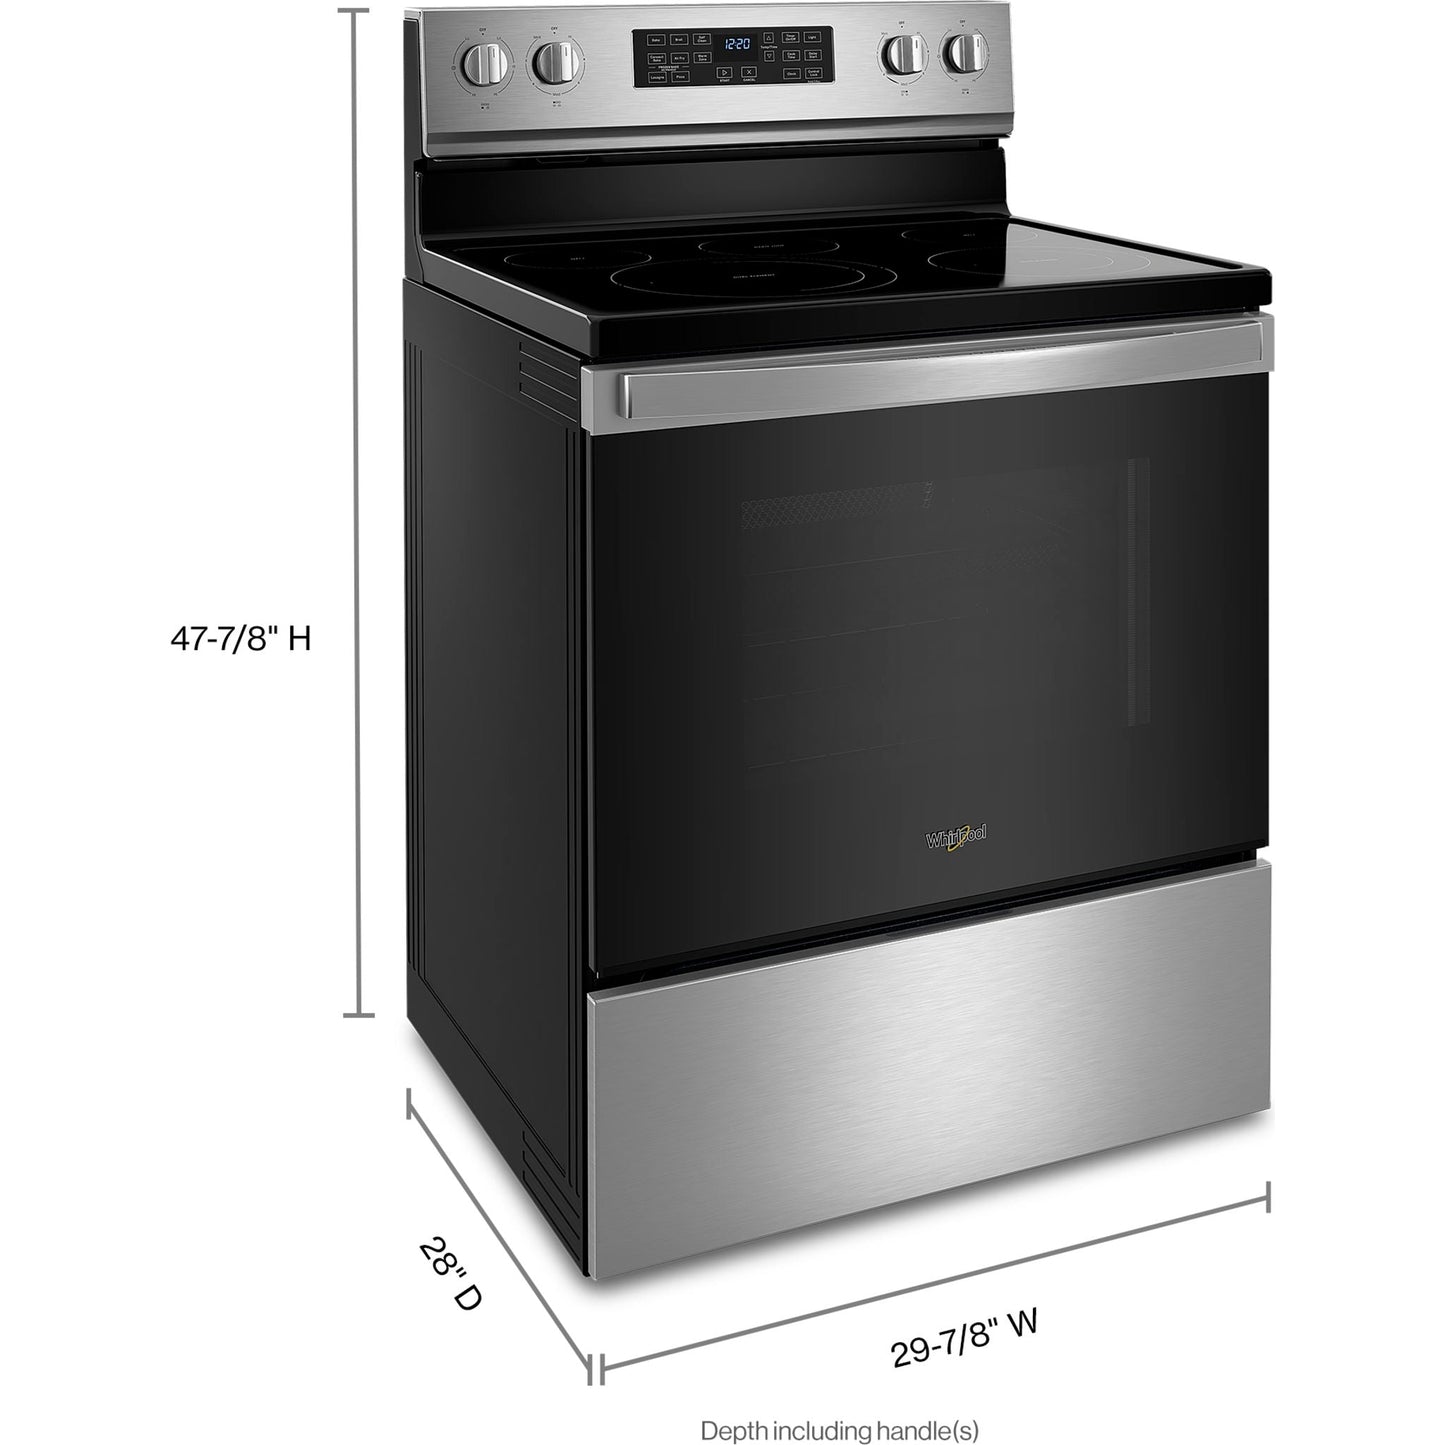 Whirlpool Electric Range (YWFE550S0LZ) - STAINLESS STEEL